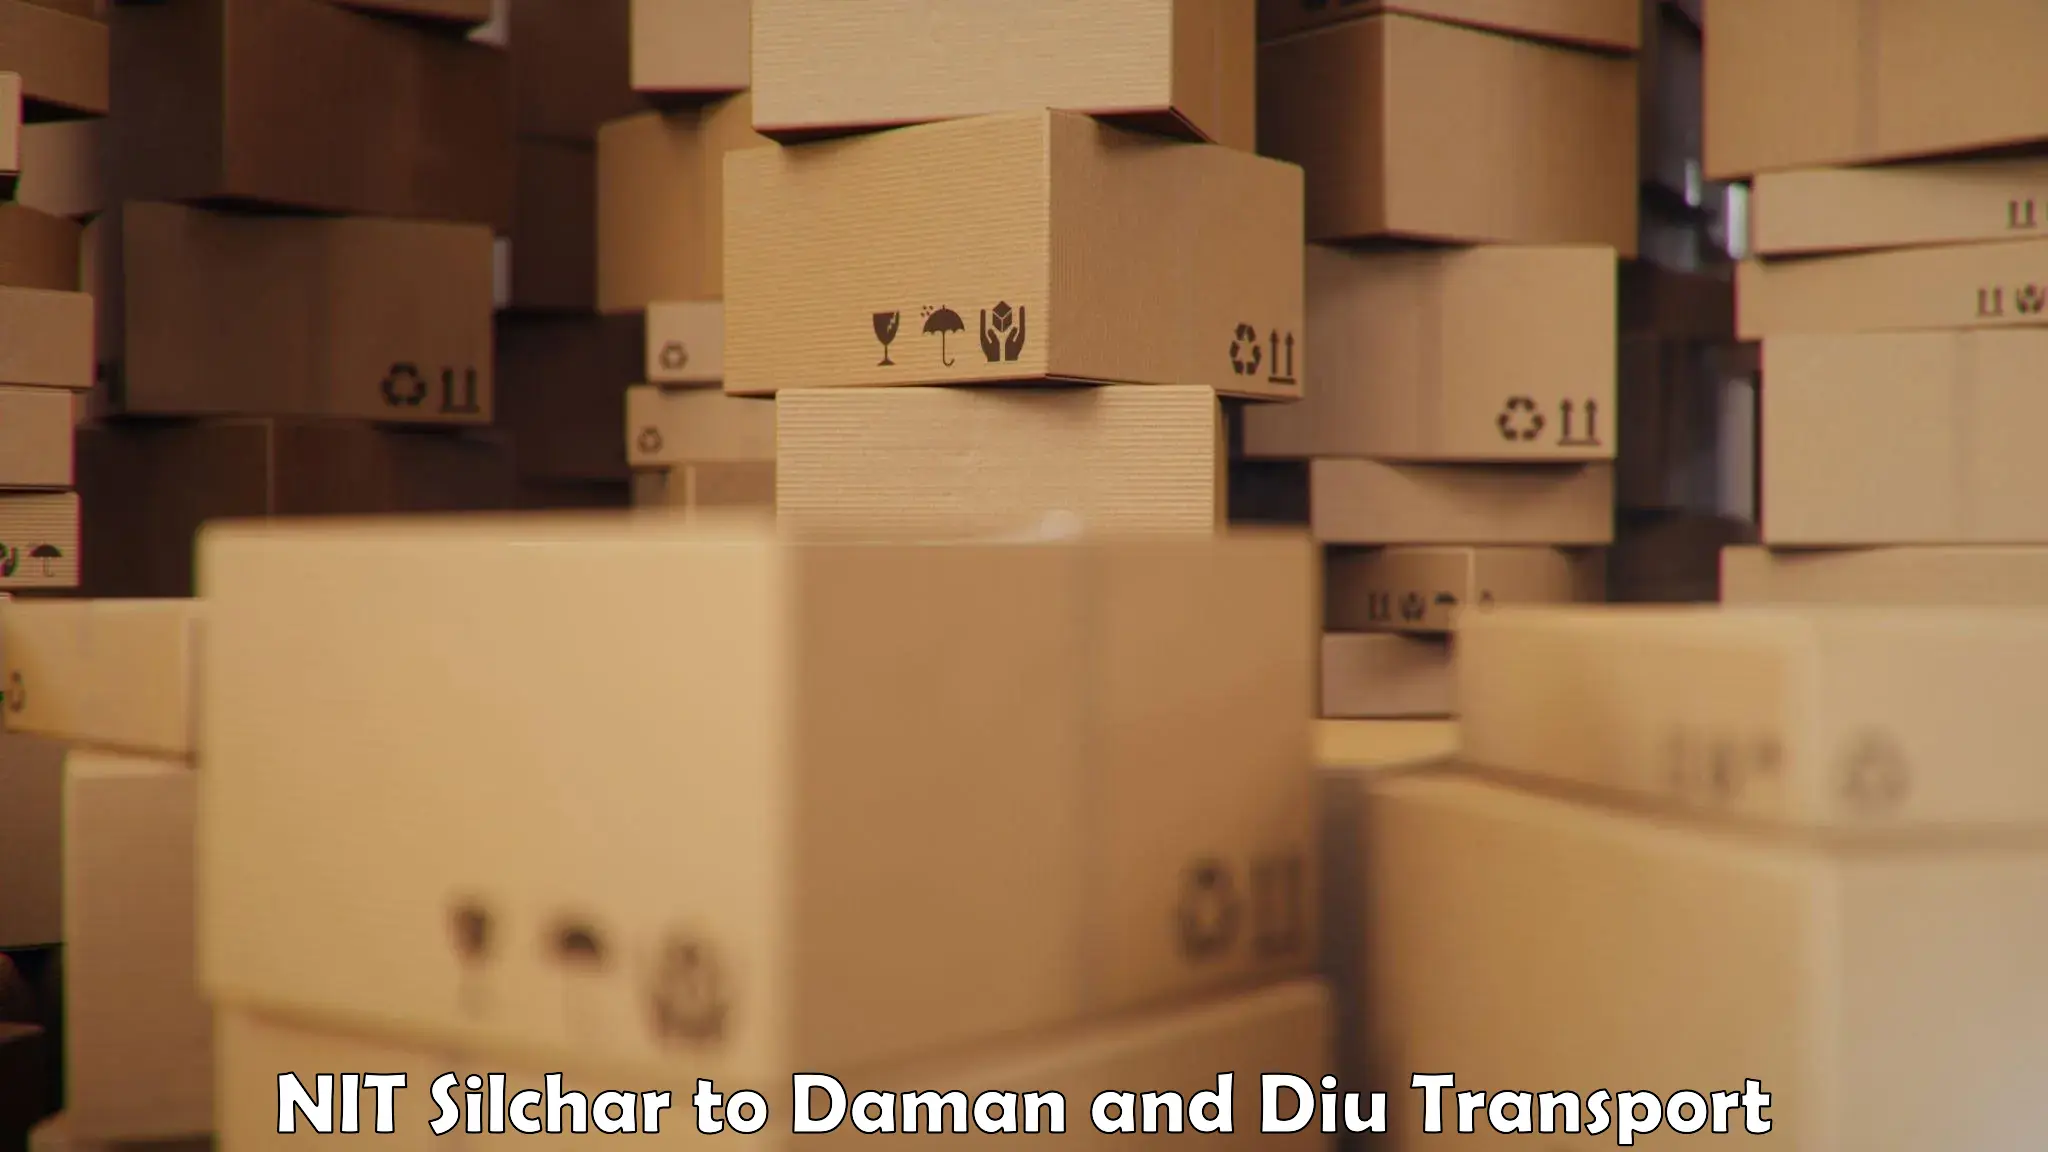 Material transport services NIT Silchar to Daman and Diu